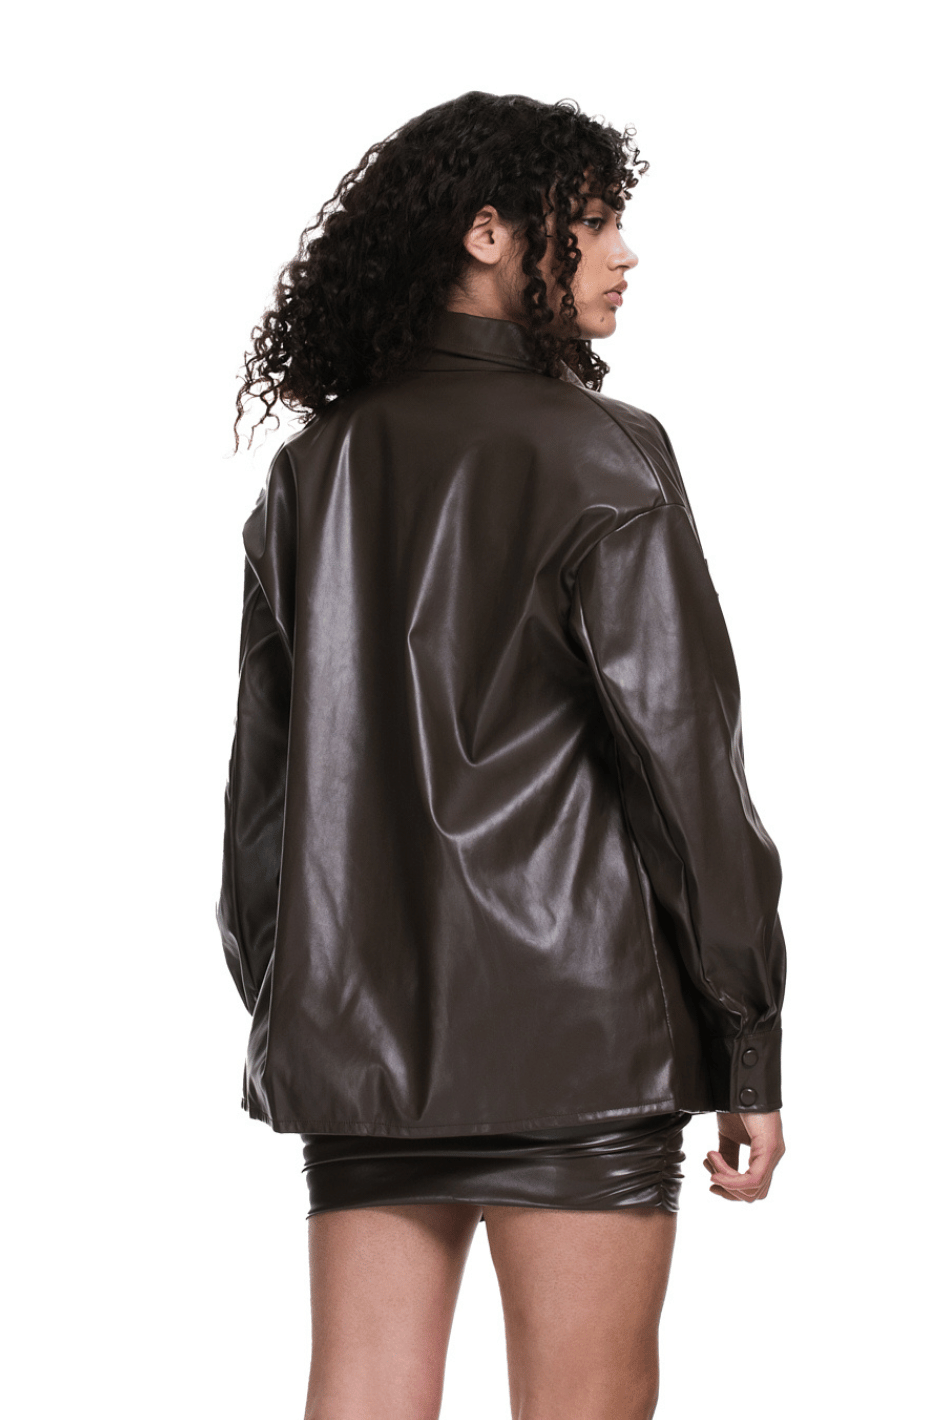 Chocolate Temptation Faux Leather Shirt Jacket - Expressive Collective CO.